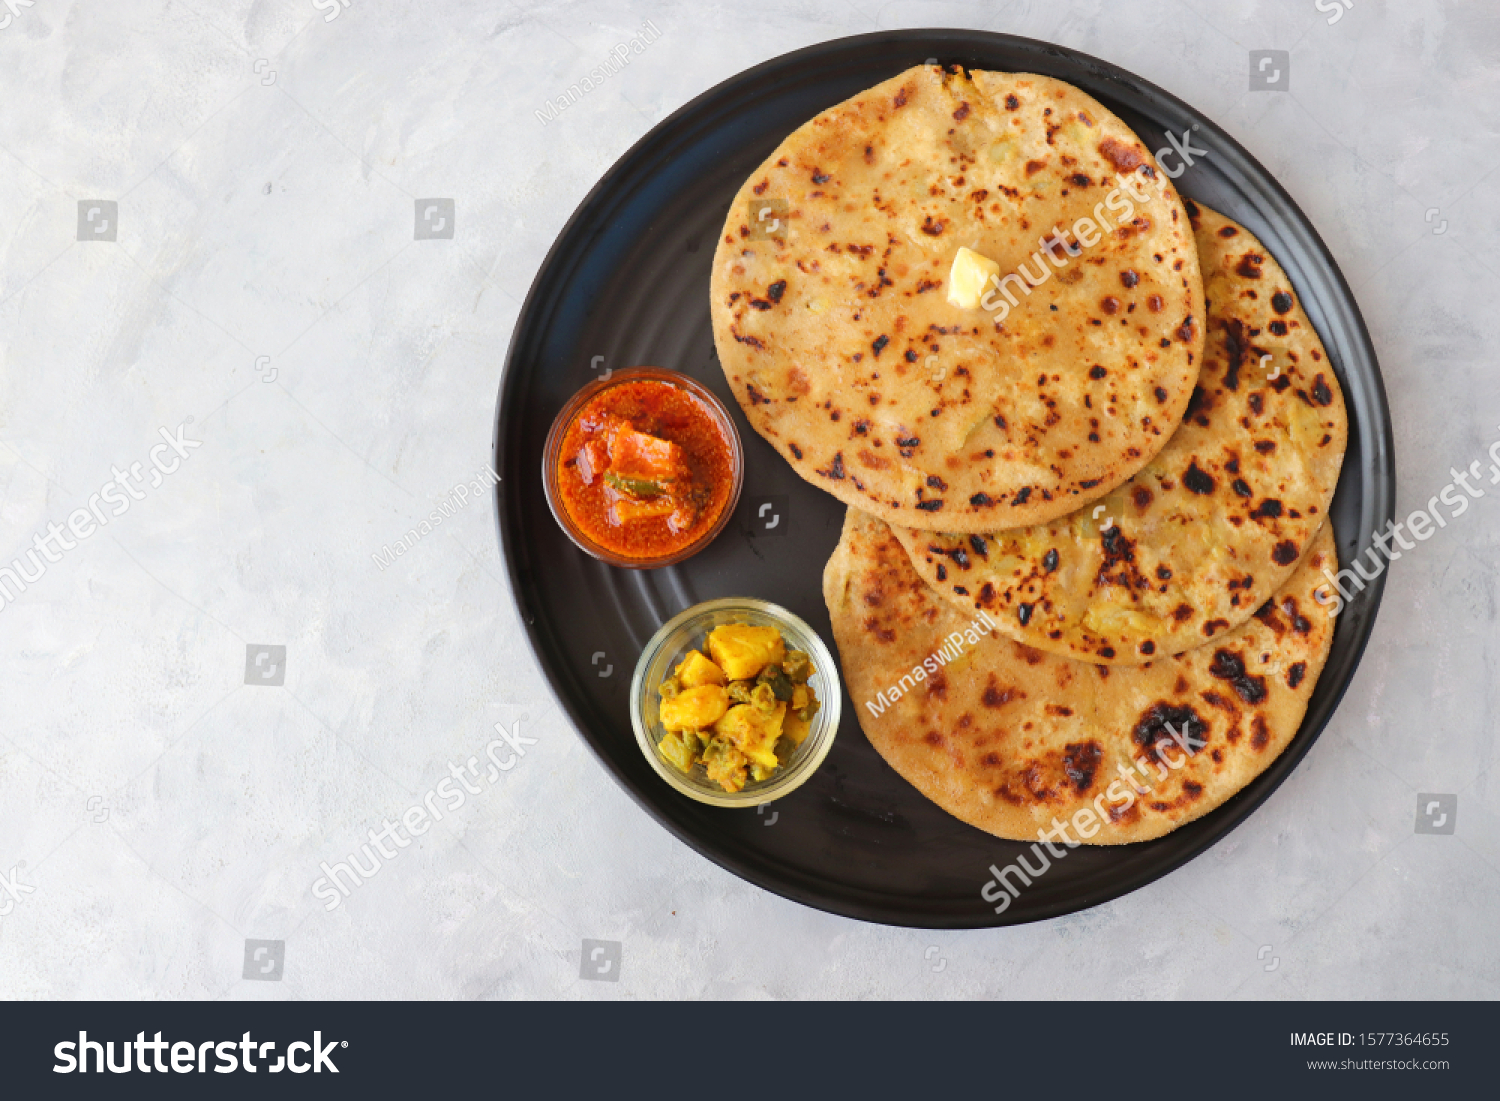 Indian Food - Aloo Paratha or Indian Potato stuffed Flatbread. Served with butter, pickle and masala potatoes. over light background with copy space. #1577364655